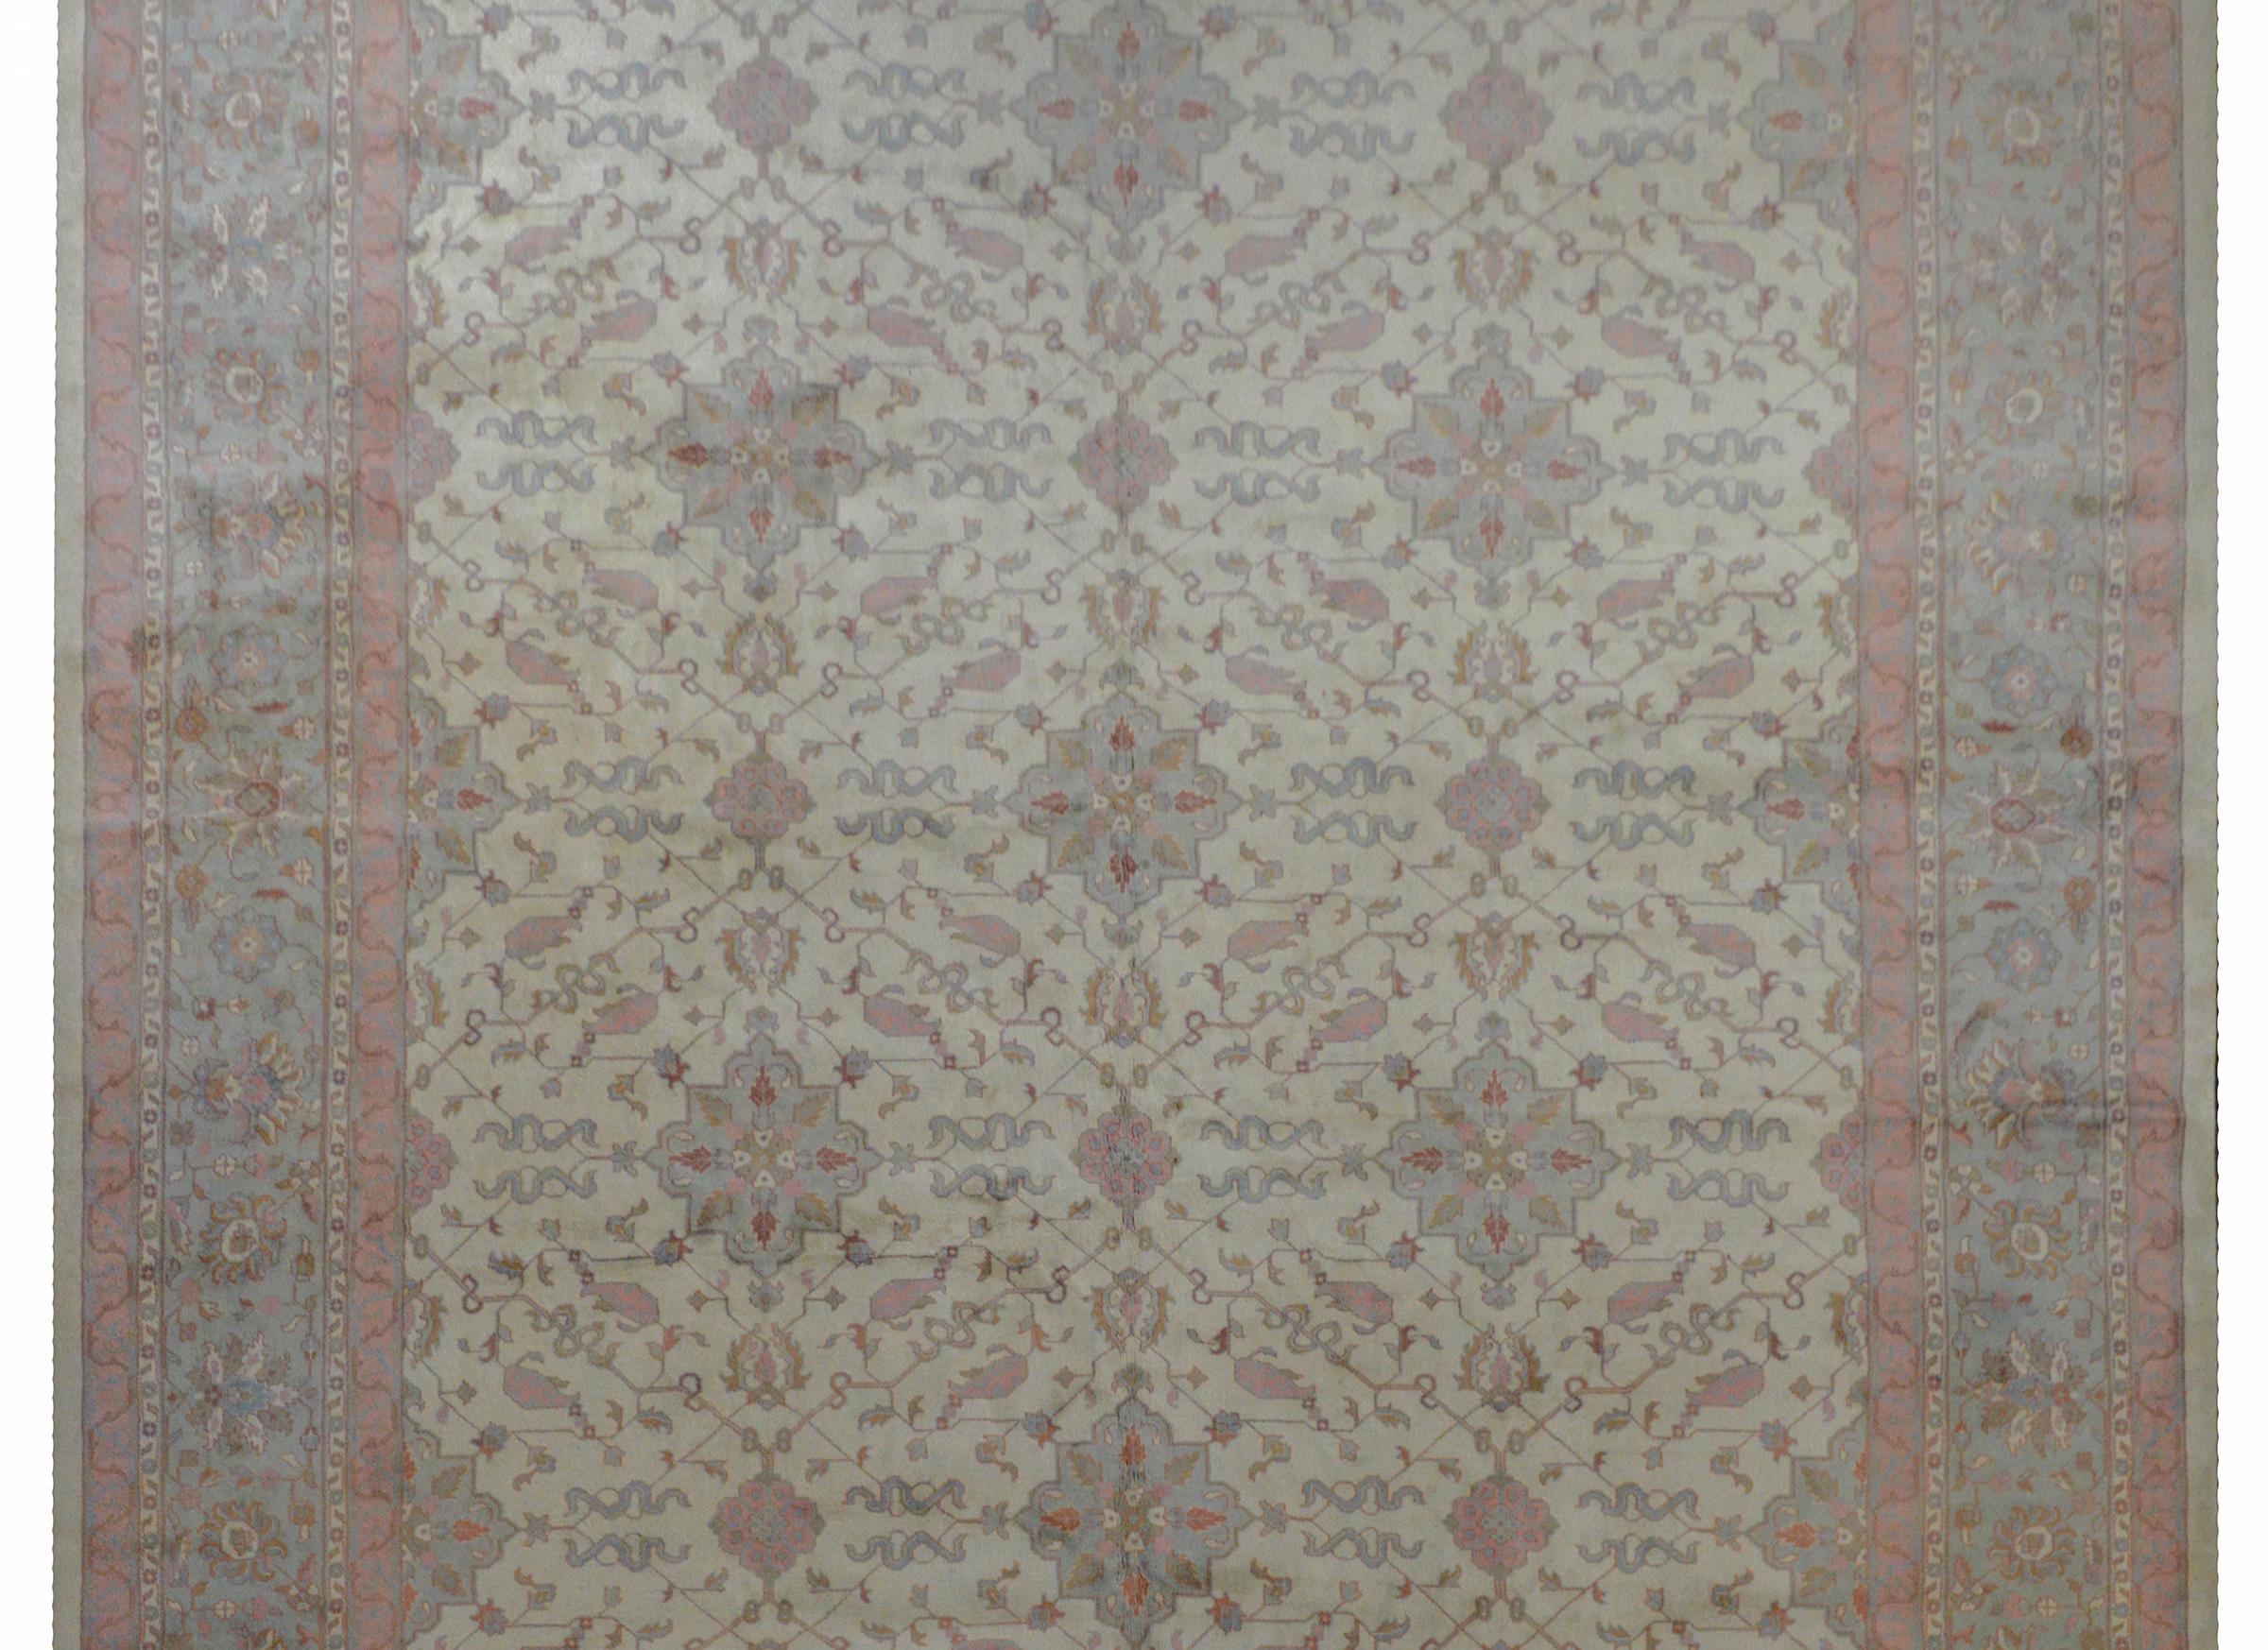 A Grande mid-20th century Indian Mahal rug with a wonderful all-over trellis pattern with large-scale floral medallions and scrolling vines and leaves on a cream colored background. The border is fantastic with a large-scale floral and vine